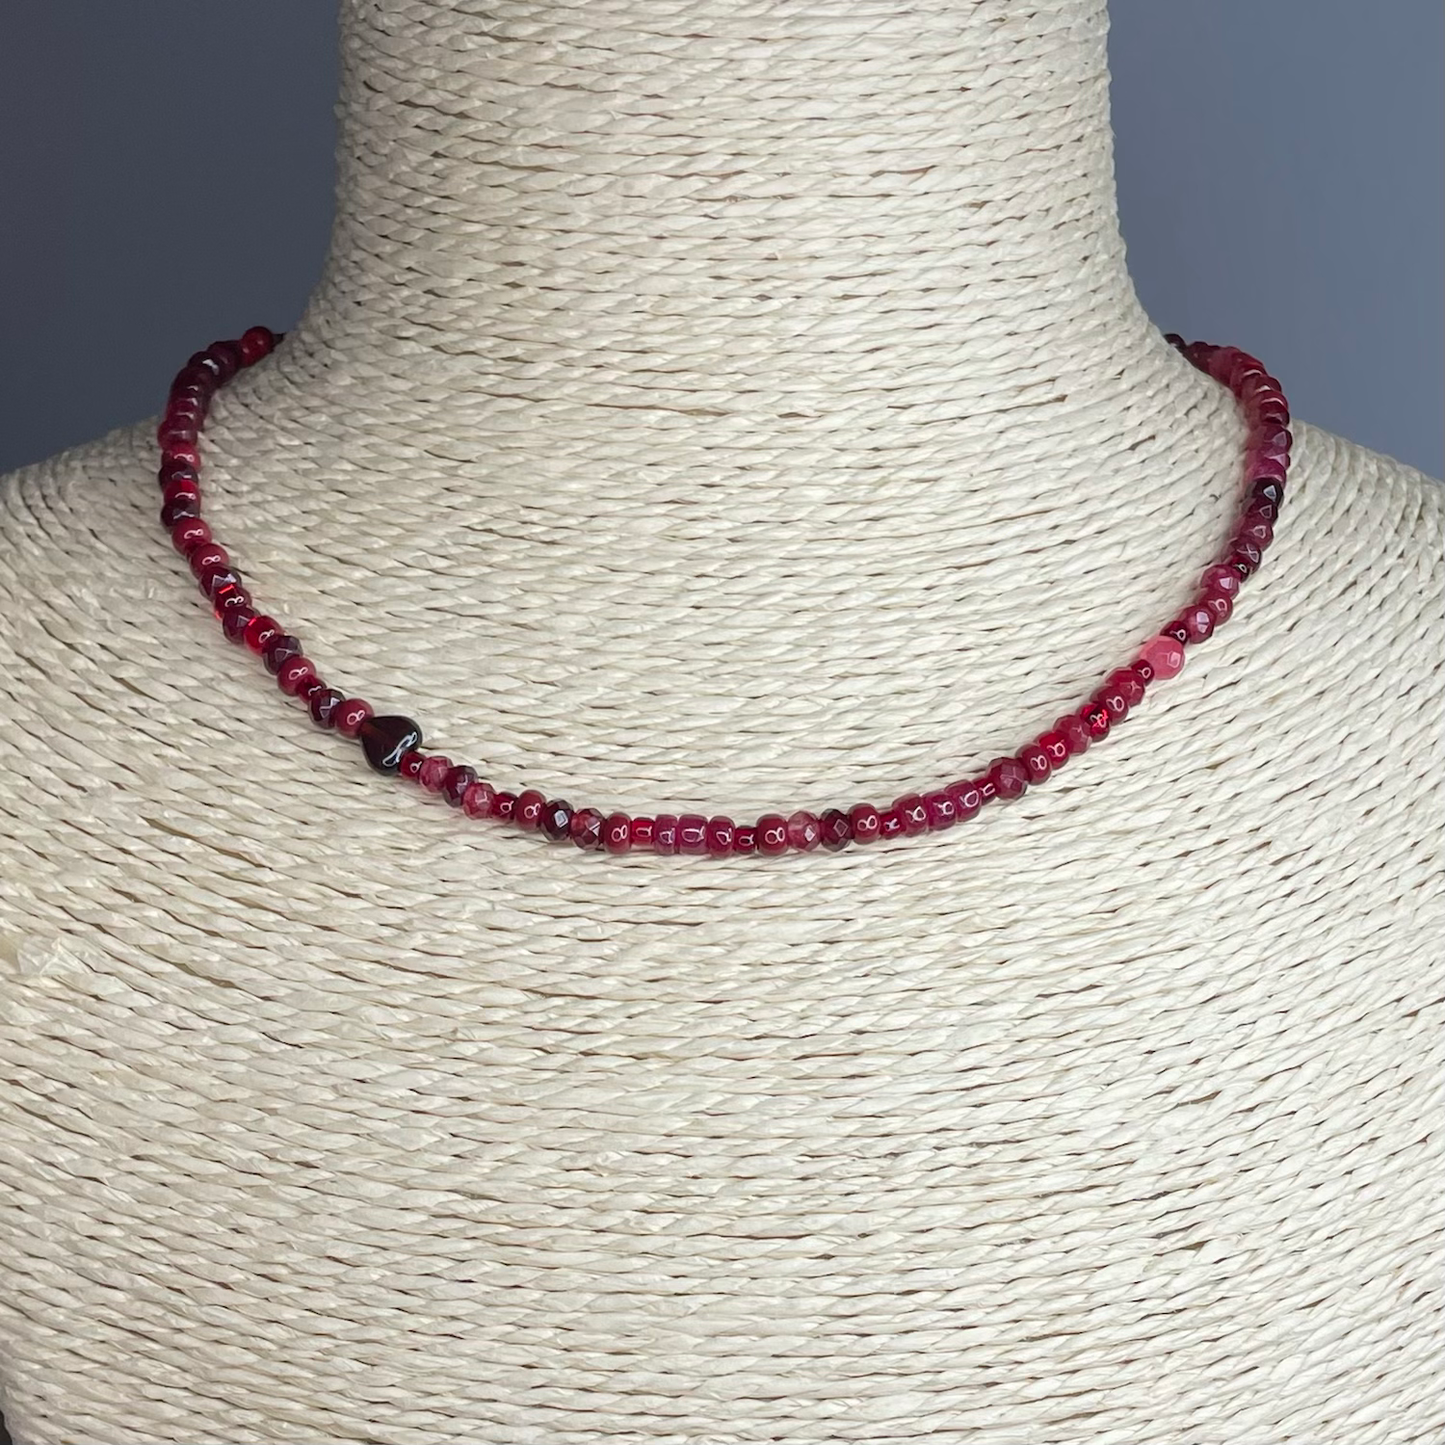 There's No Place Like Home Ruby and Garnet Necklace